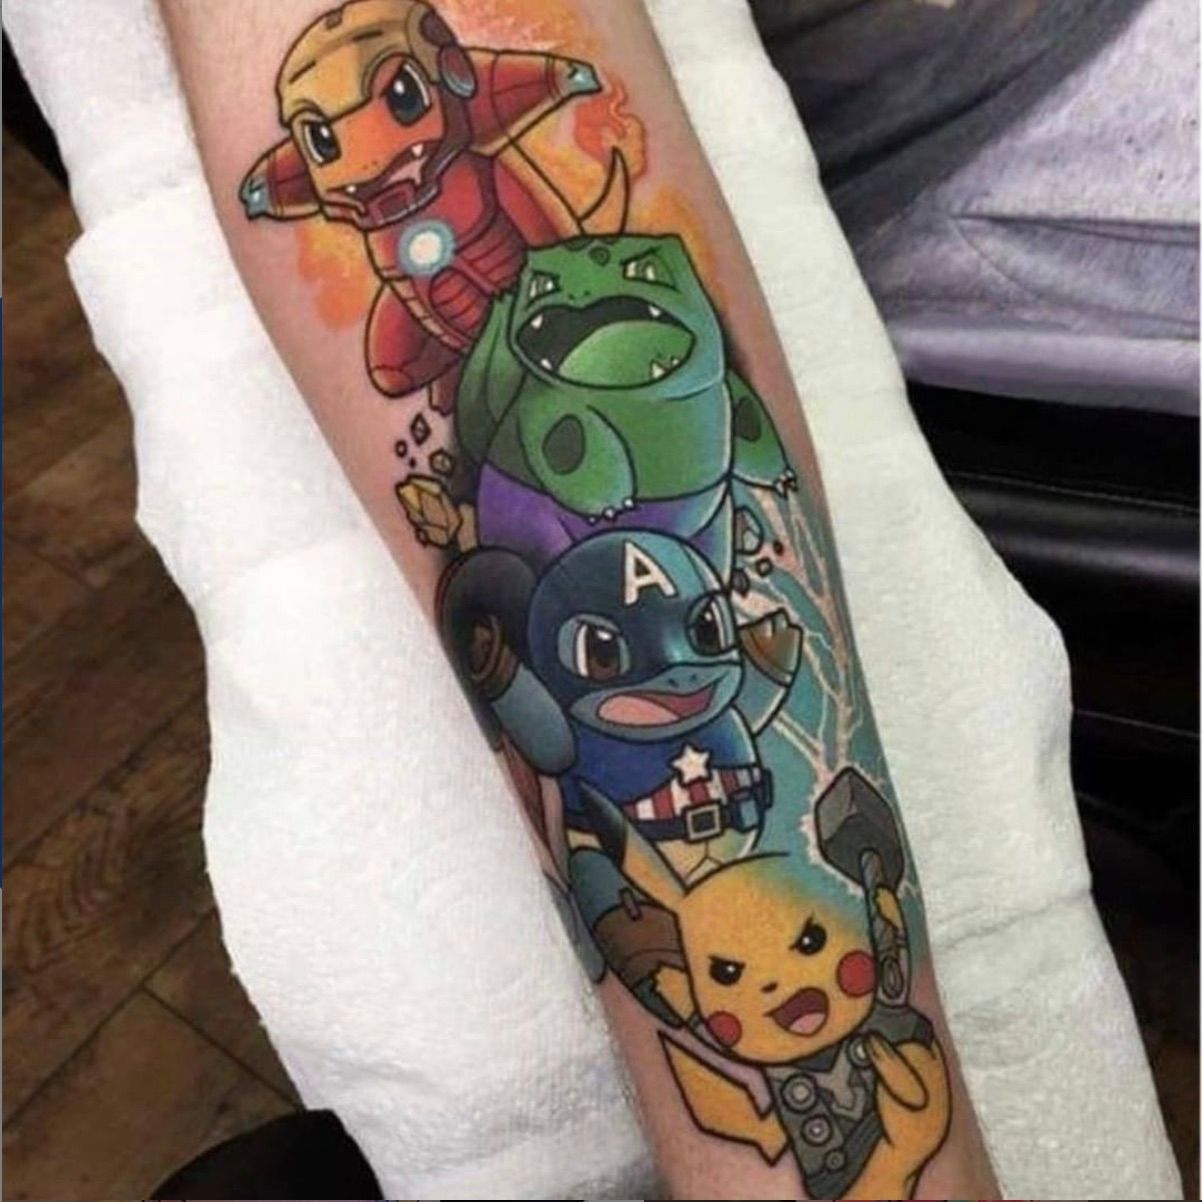 Tattoo of Generation 1 starter Pokemon and Pikachu as the Avengers